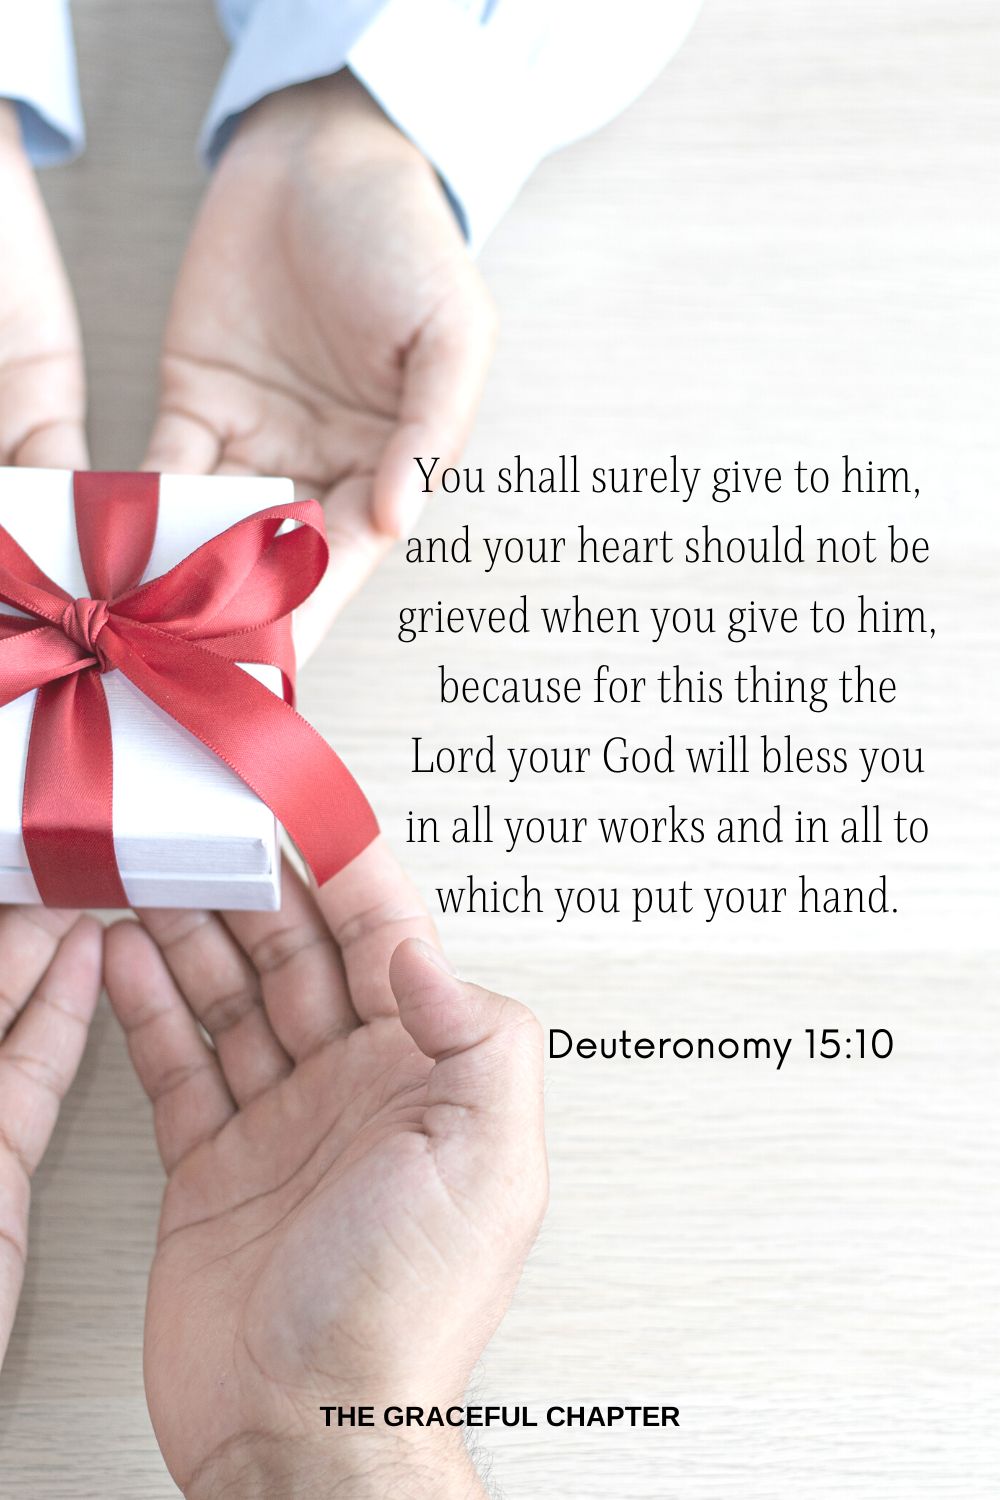 You shall surely give to him, and your heart should not be grieved when you give to him, because for this thing the Lord your God will bless you in all your works and in all to which you put your hand. Deuteronomy 15:10